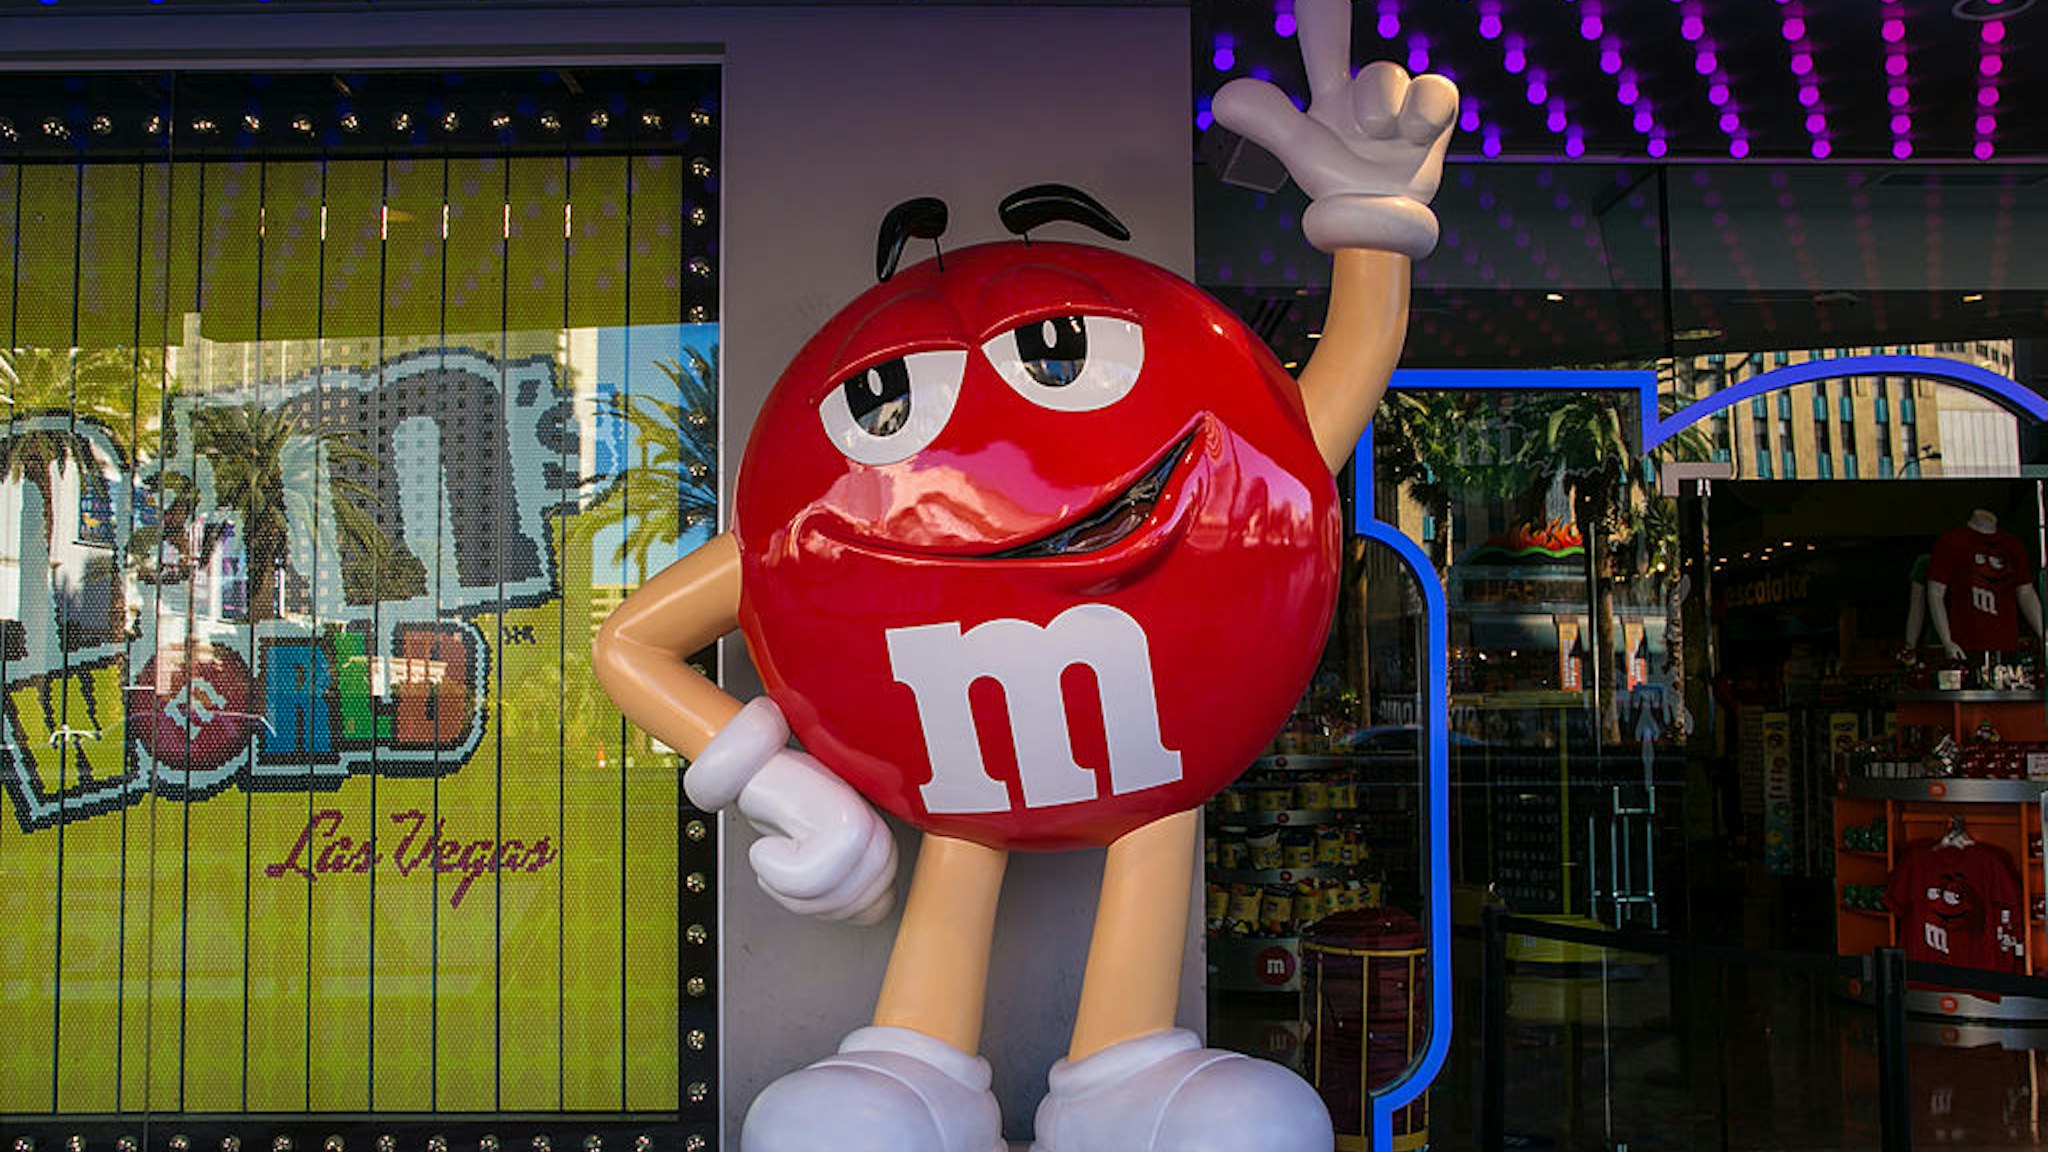 LAS VEGAS, NV - DECEMBER 14: A giant red M&amp;M candy stands in front of the store located on The Strip on December 14, 2013 in Las Vegas, Nevada. Tourism in America's "Sin City" is slowly making a comeback from the Great Recession with visitors filling the hotels, restaurants, and casinos in record numbers. (Photo by George Rose/Getty Images)